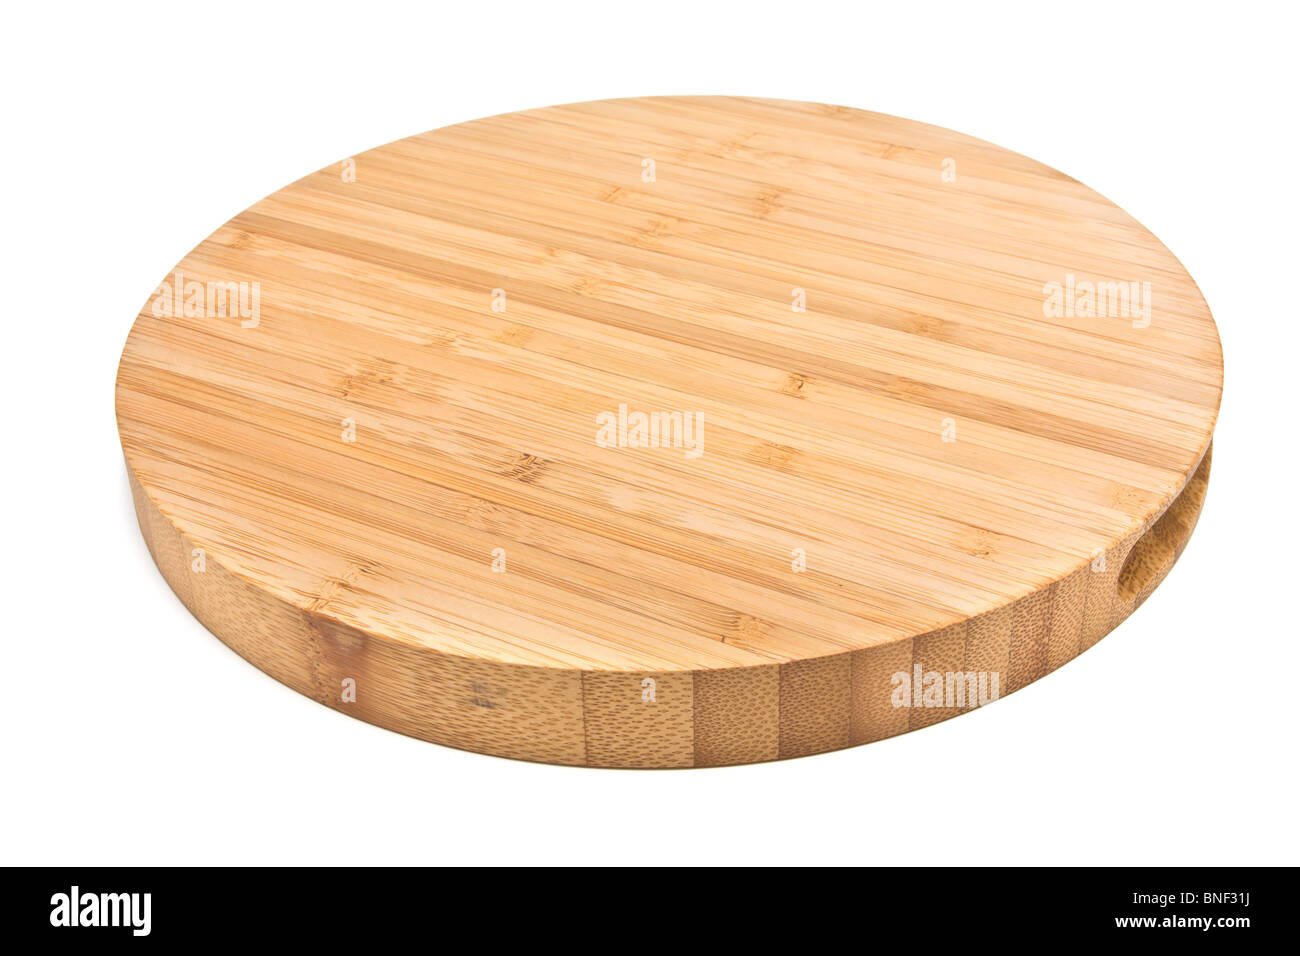 Round Bamboo Chopping Board from low perspective isolated against white background. Stock Photo